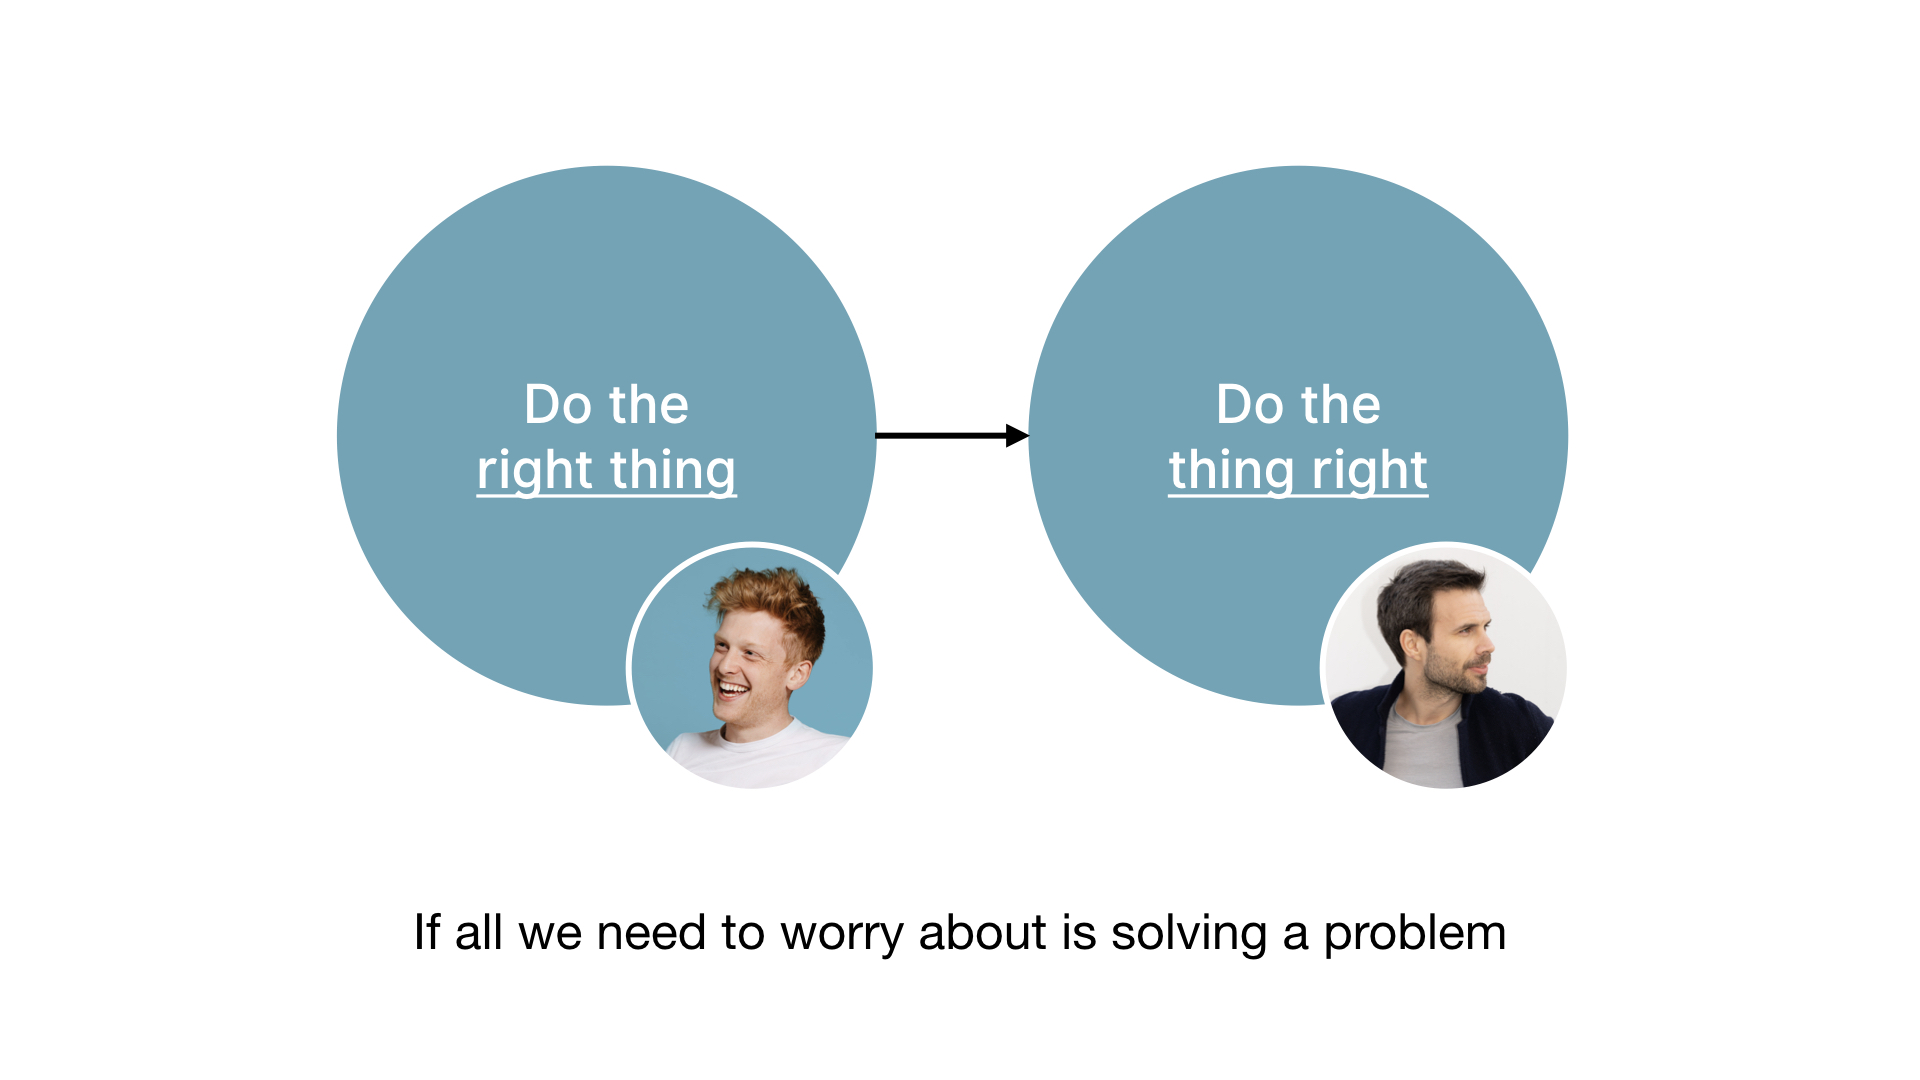 Only worrying about solving a problem